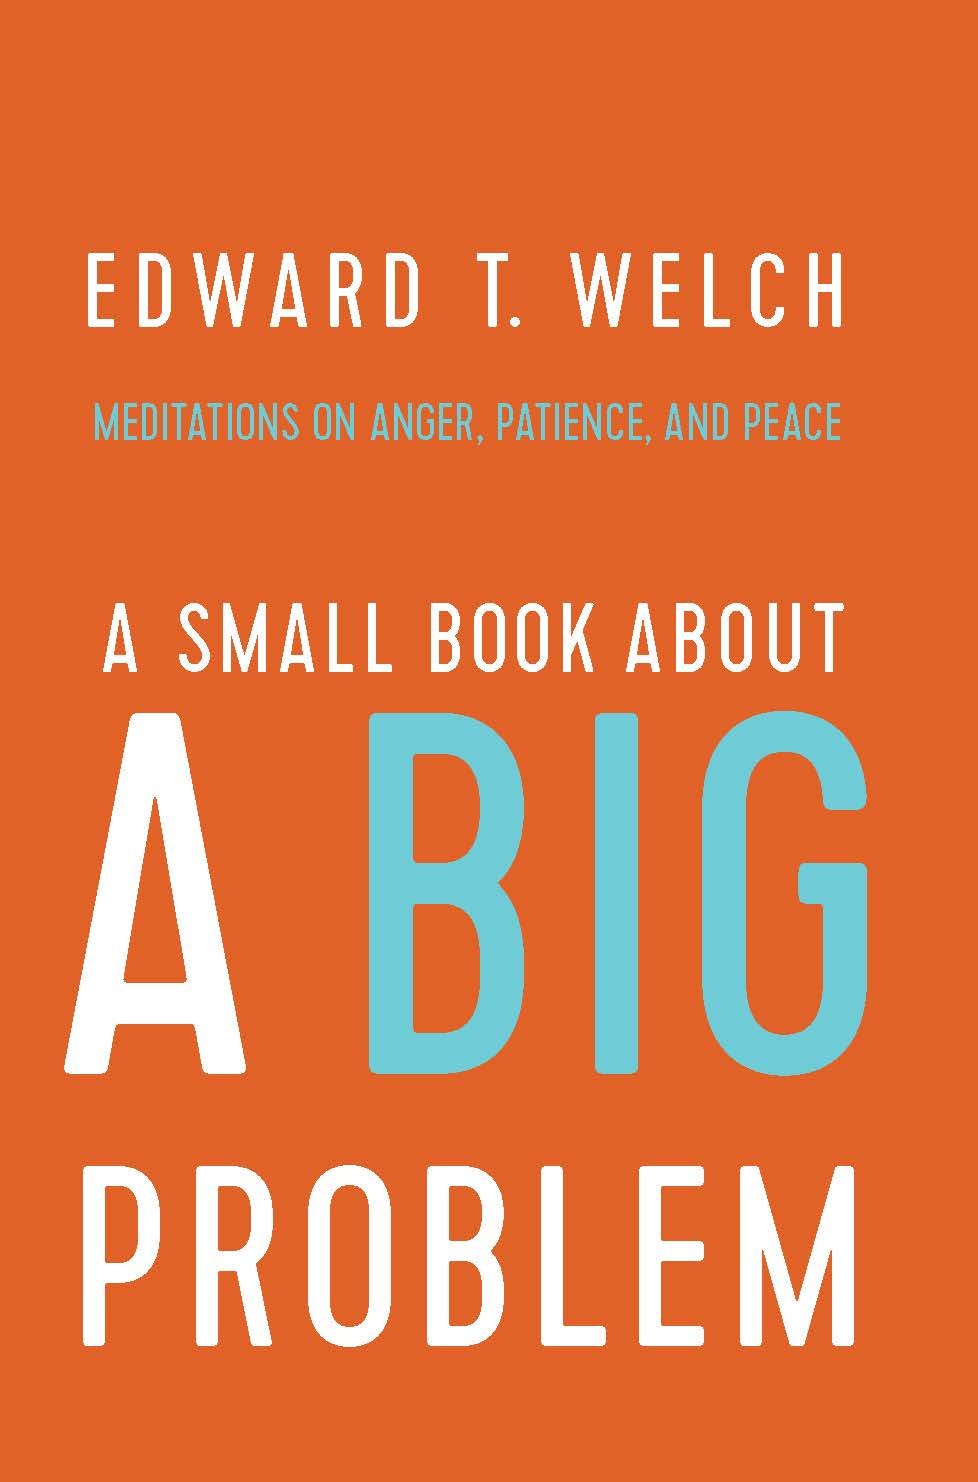 Book Notice: A SMALL BOOK ABOUT A BIG PROBLEM: MEDITATIONS ON ANGER, PATIENCE, AND PEACE, by Edward T. Welch